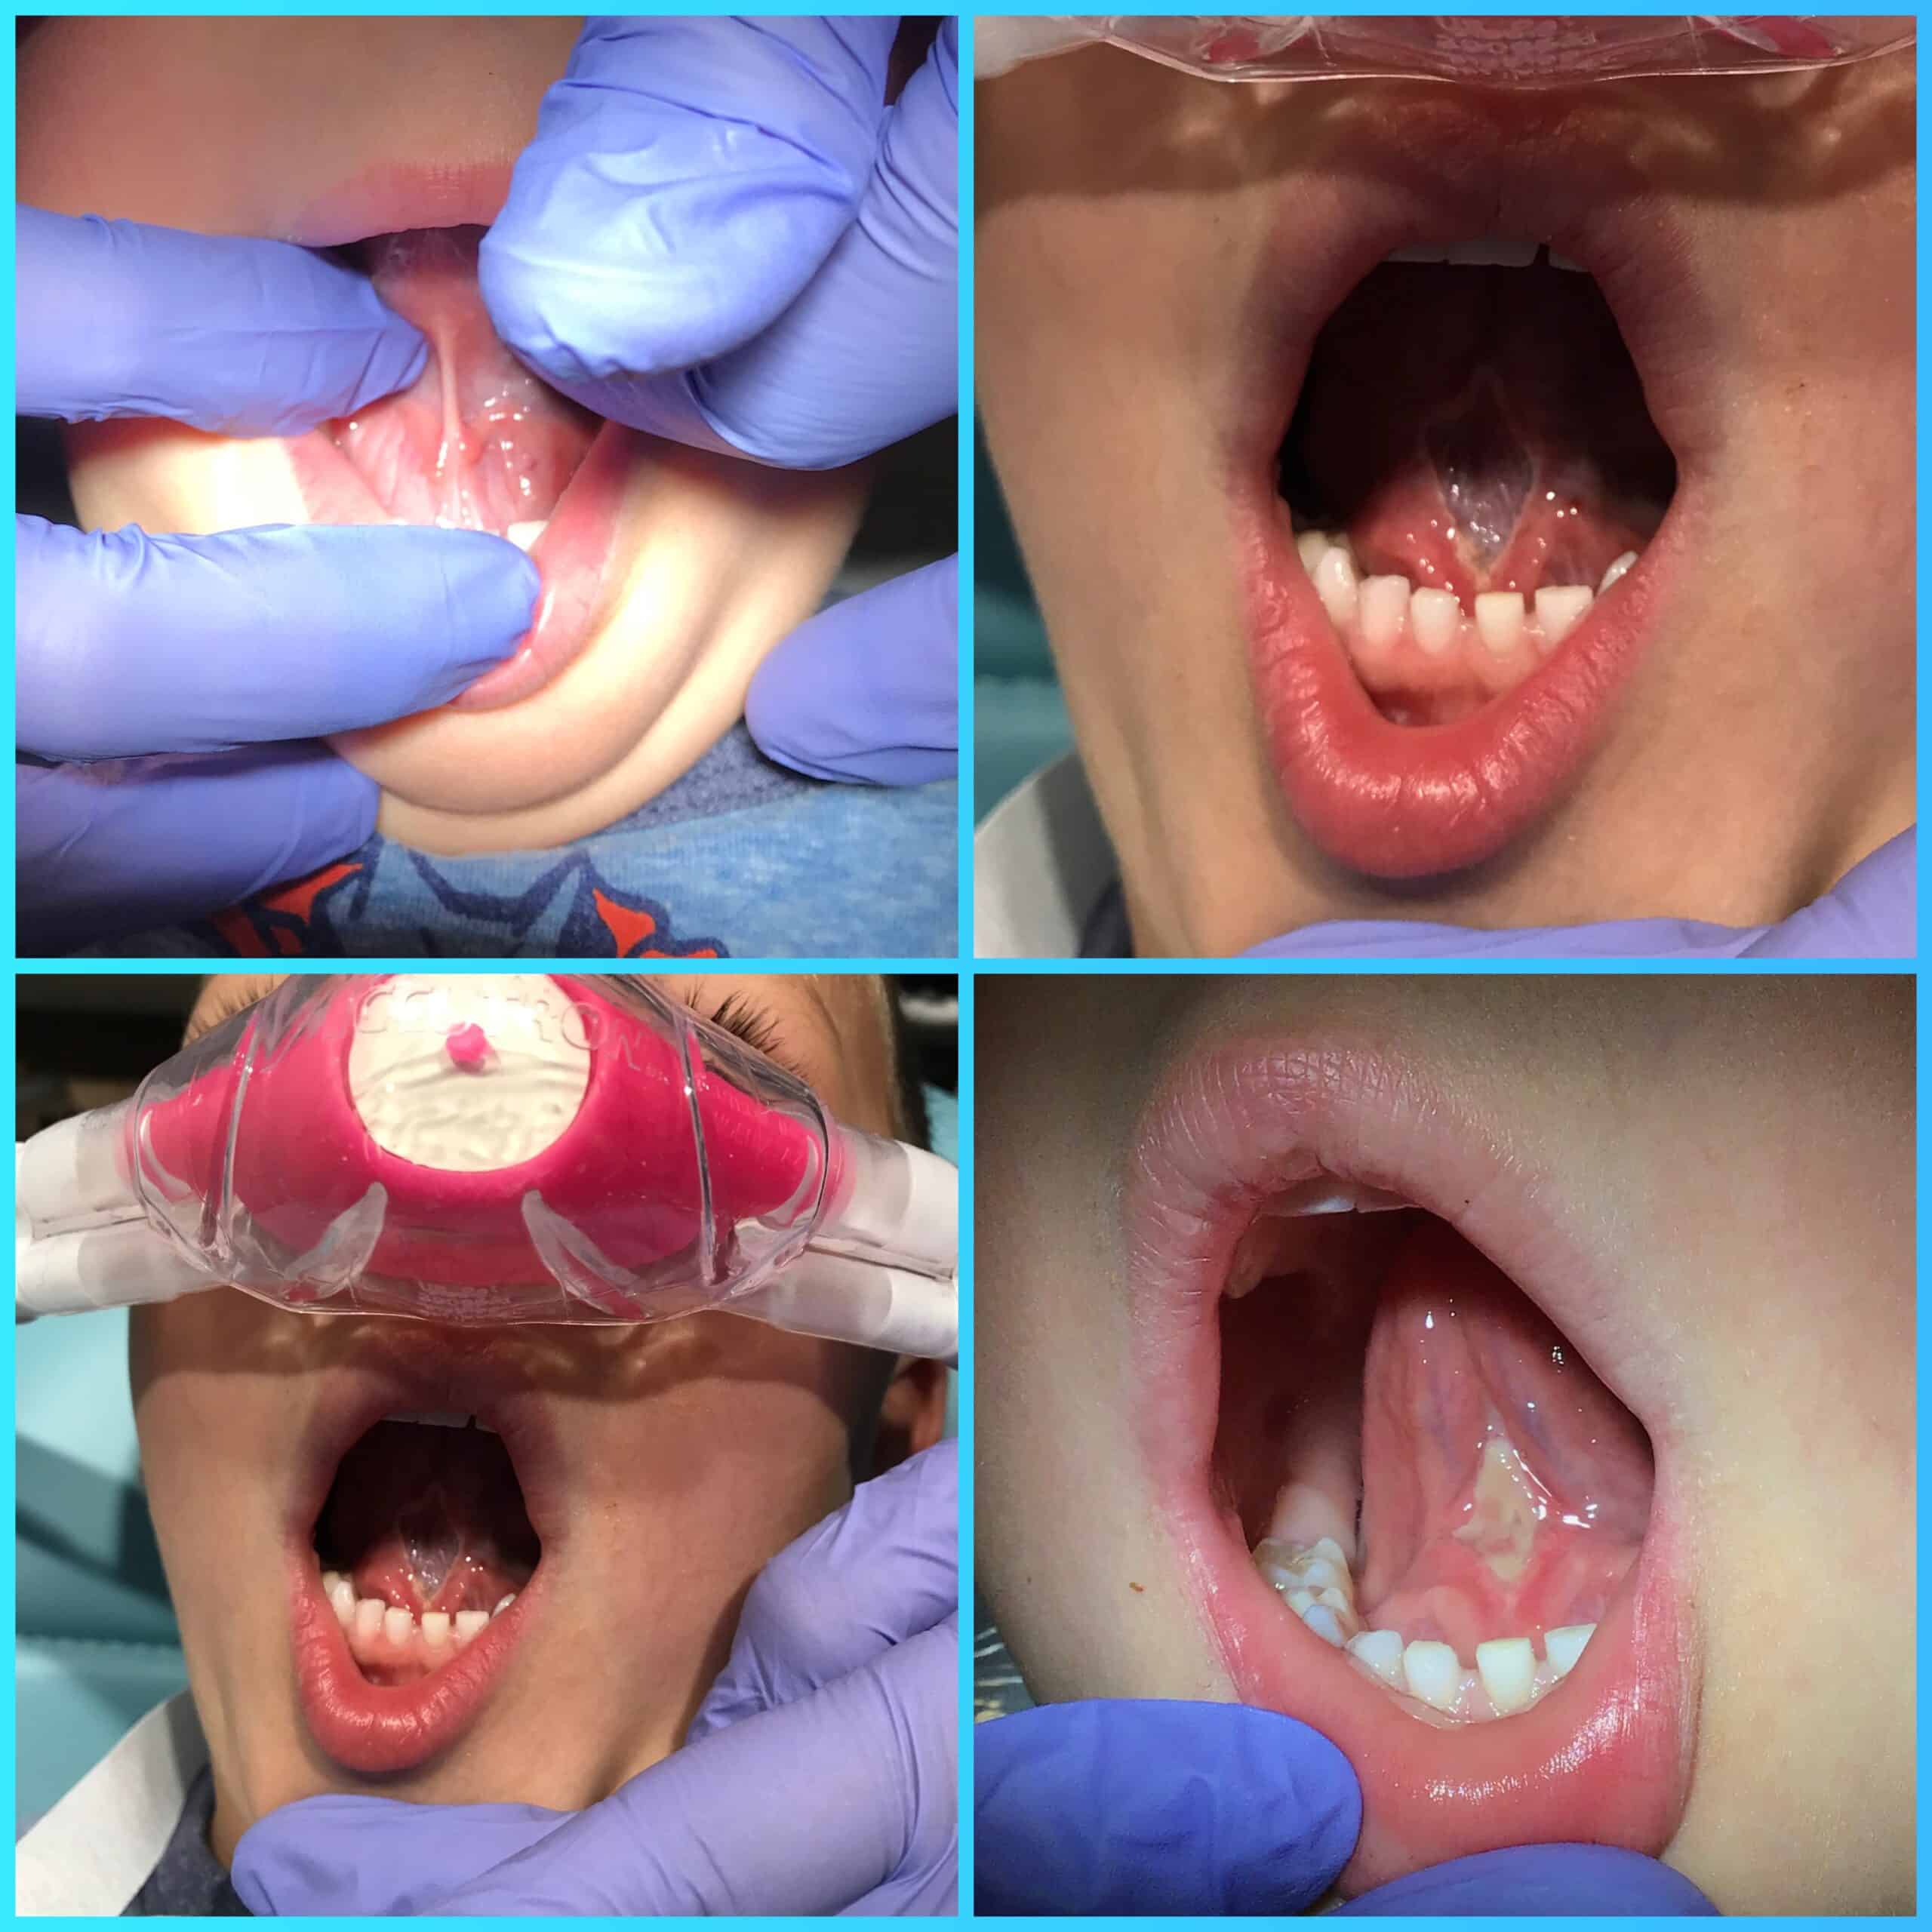 Shows progress of Tongue Tie Release Surgery